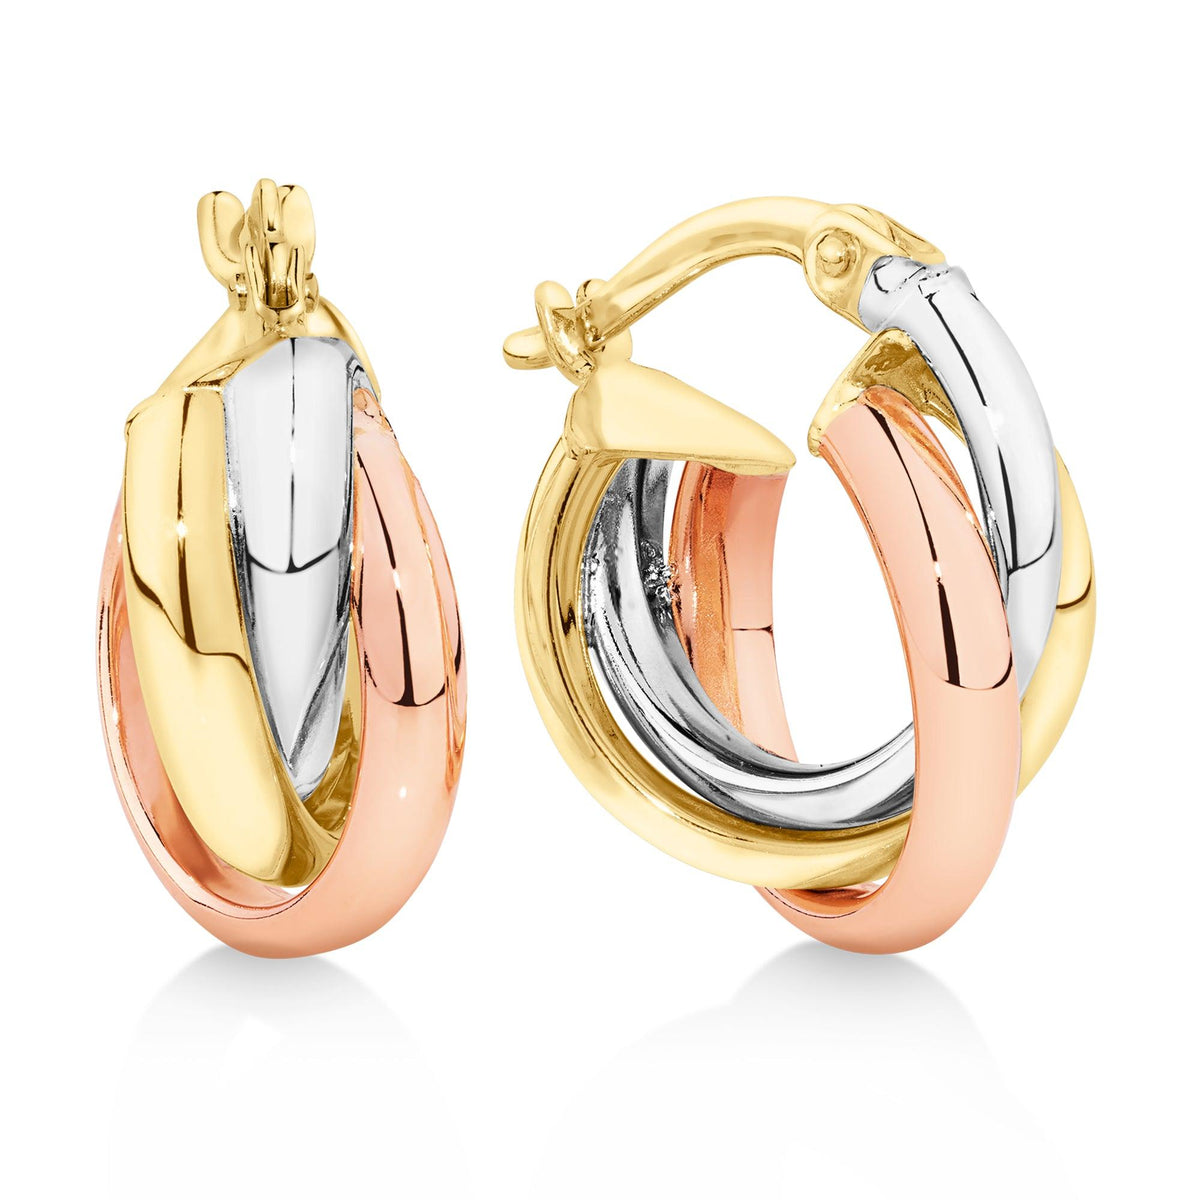 Multi Hoop Earrings in 9ct Yellow, White & Rose Gold - Wallace Bishop